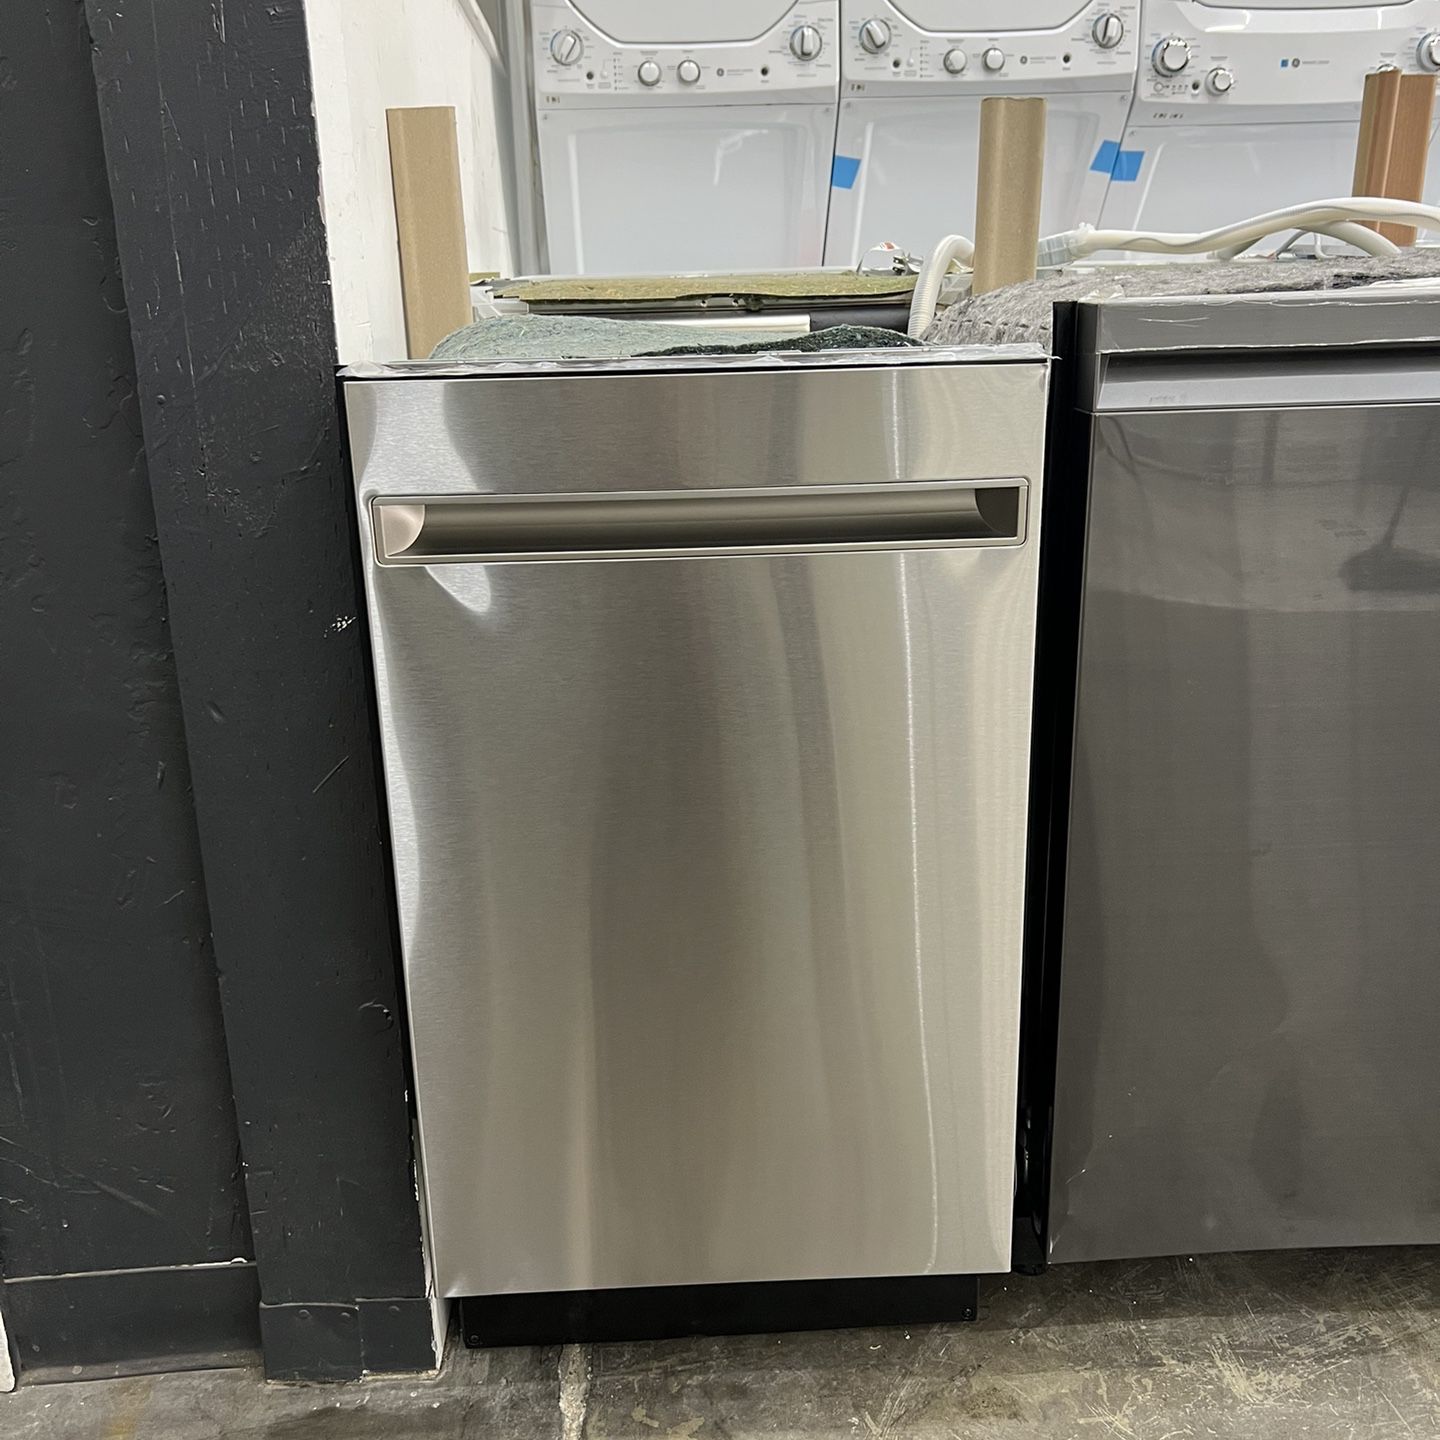 Studio size Haier by GE 18 inch dishwasher compact size 